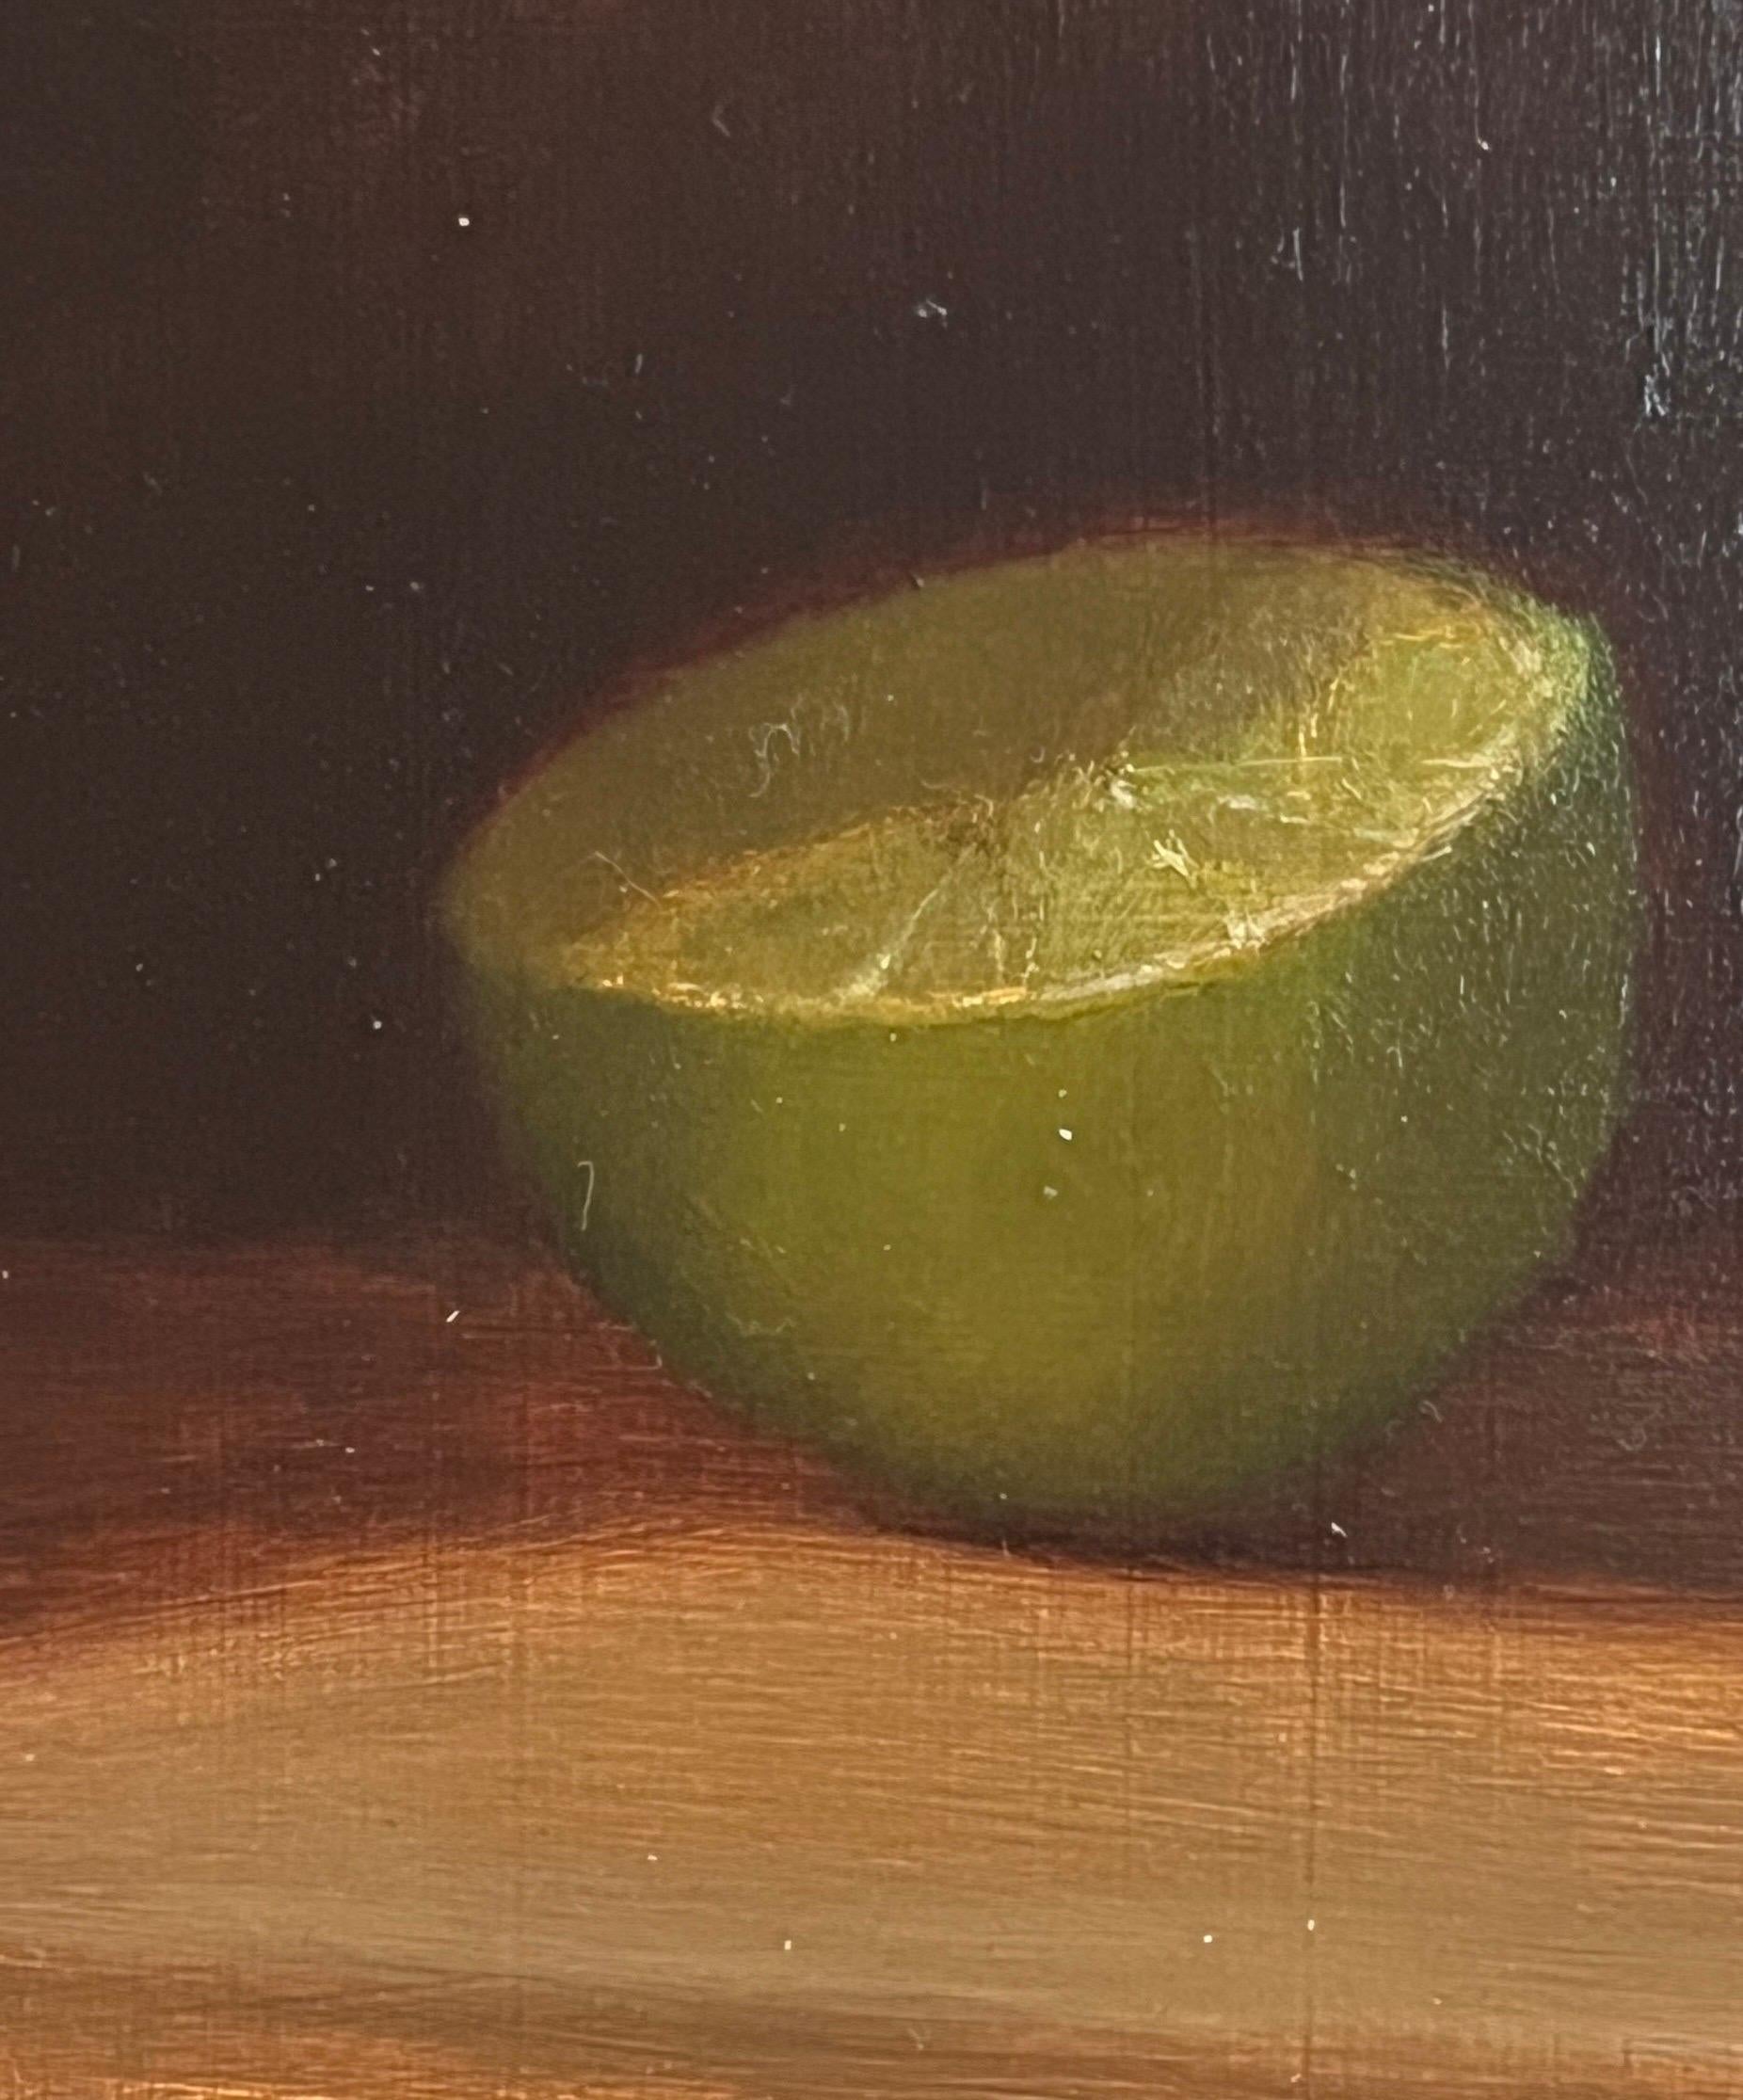 Dale Zinkowski is a master of still life. His work, reminiscent of Golden Age Dutch still life painting, glows with light and subtle, quiet beauty. This original oil painting shows a pyramid of limes dramatically placed against a dark background so